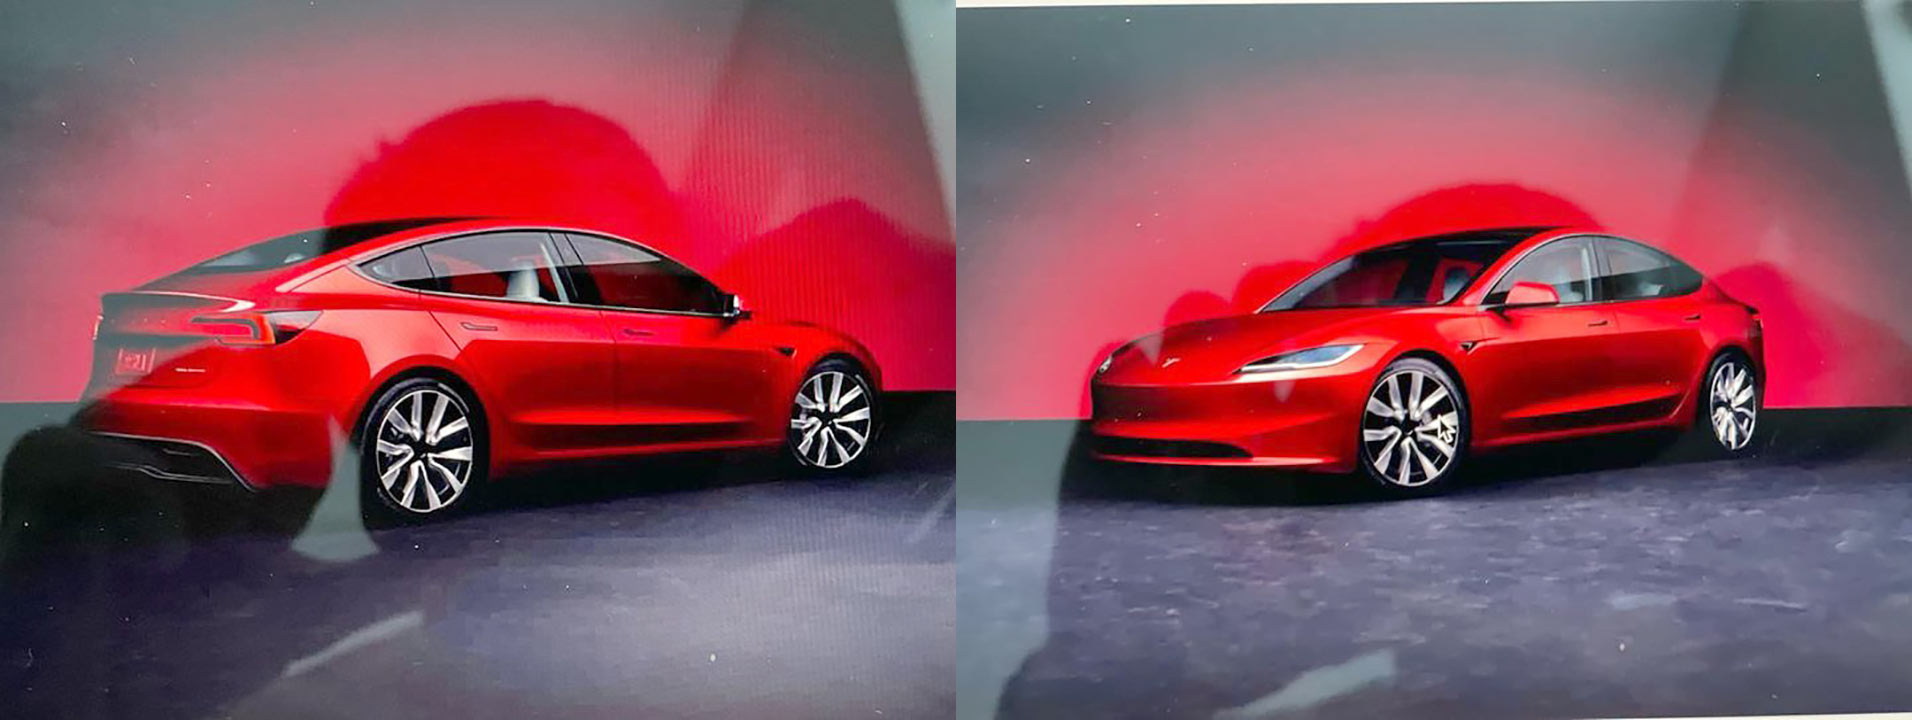 New Tesla Model 3 Highland Delivery: Issues, Accessories